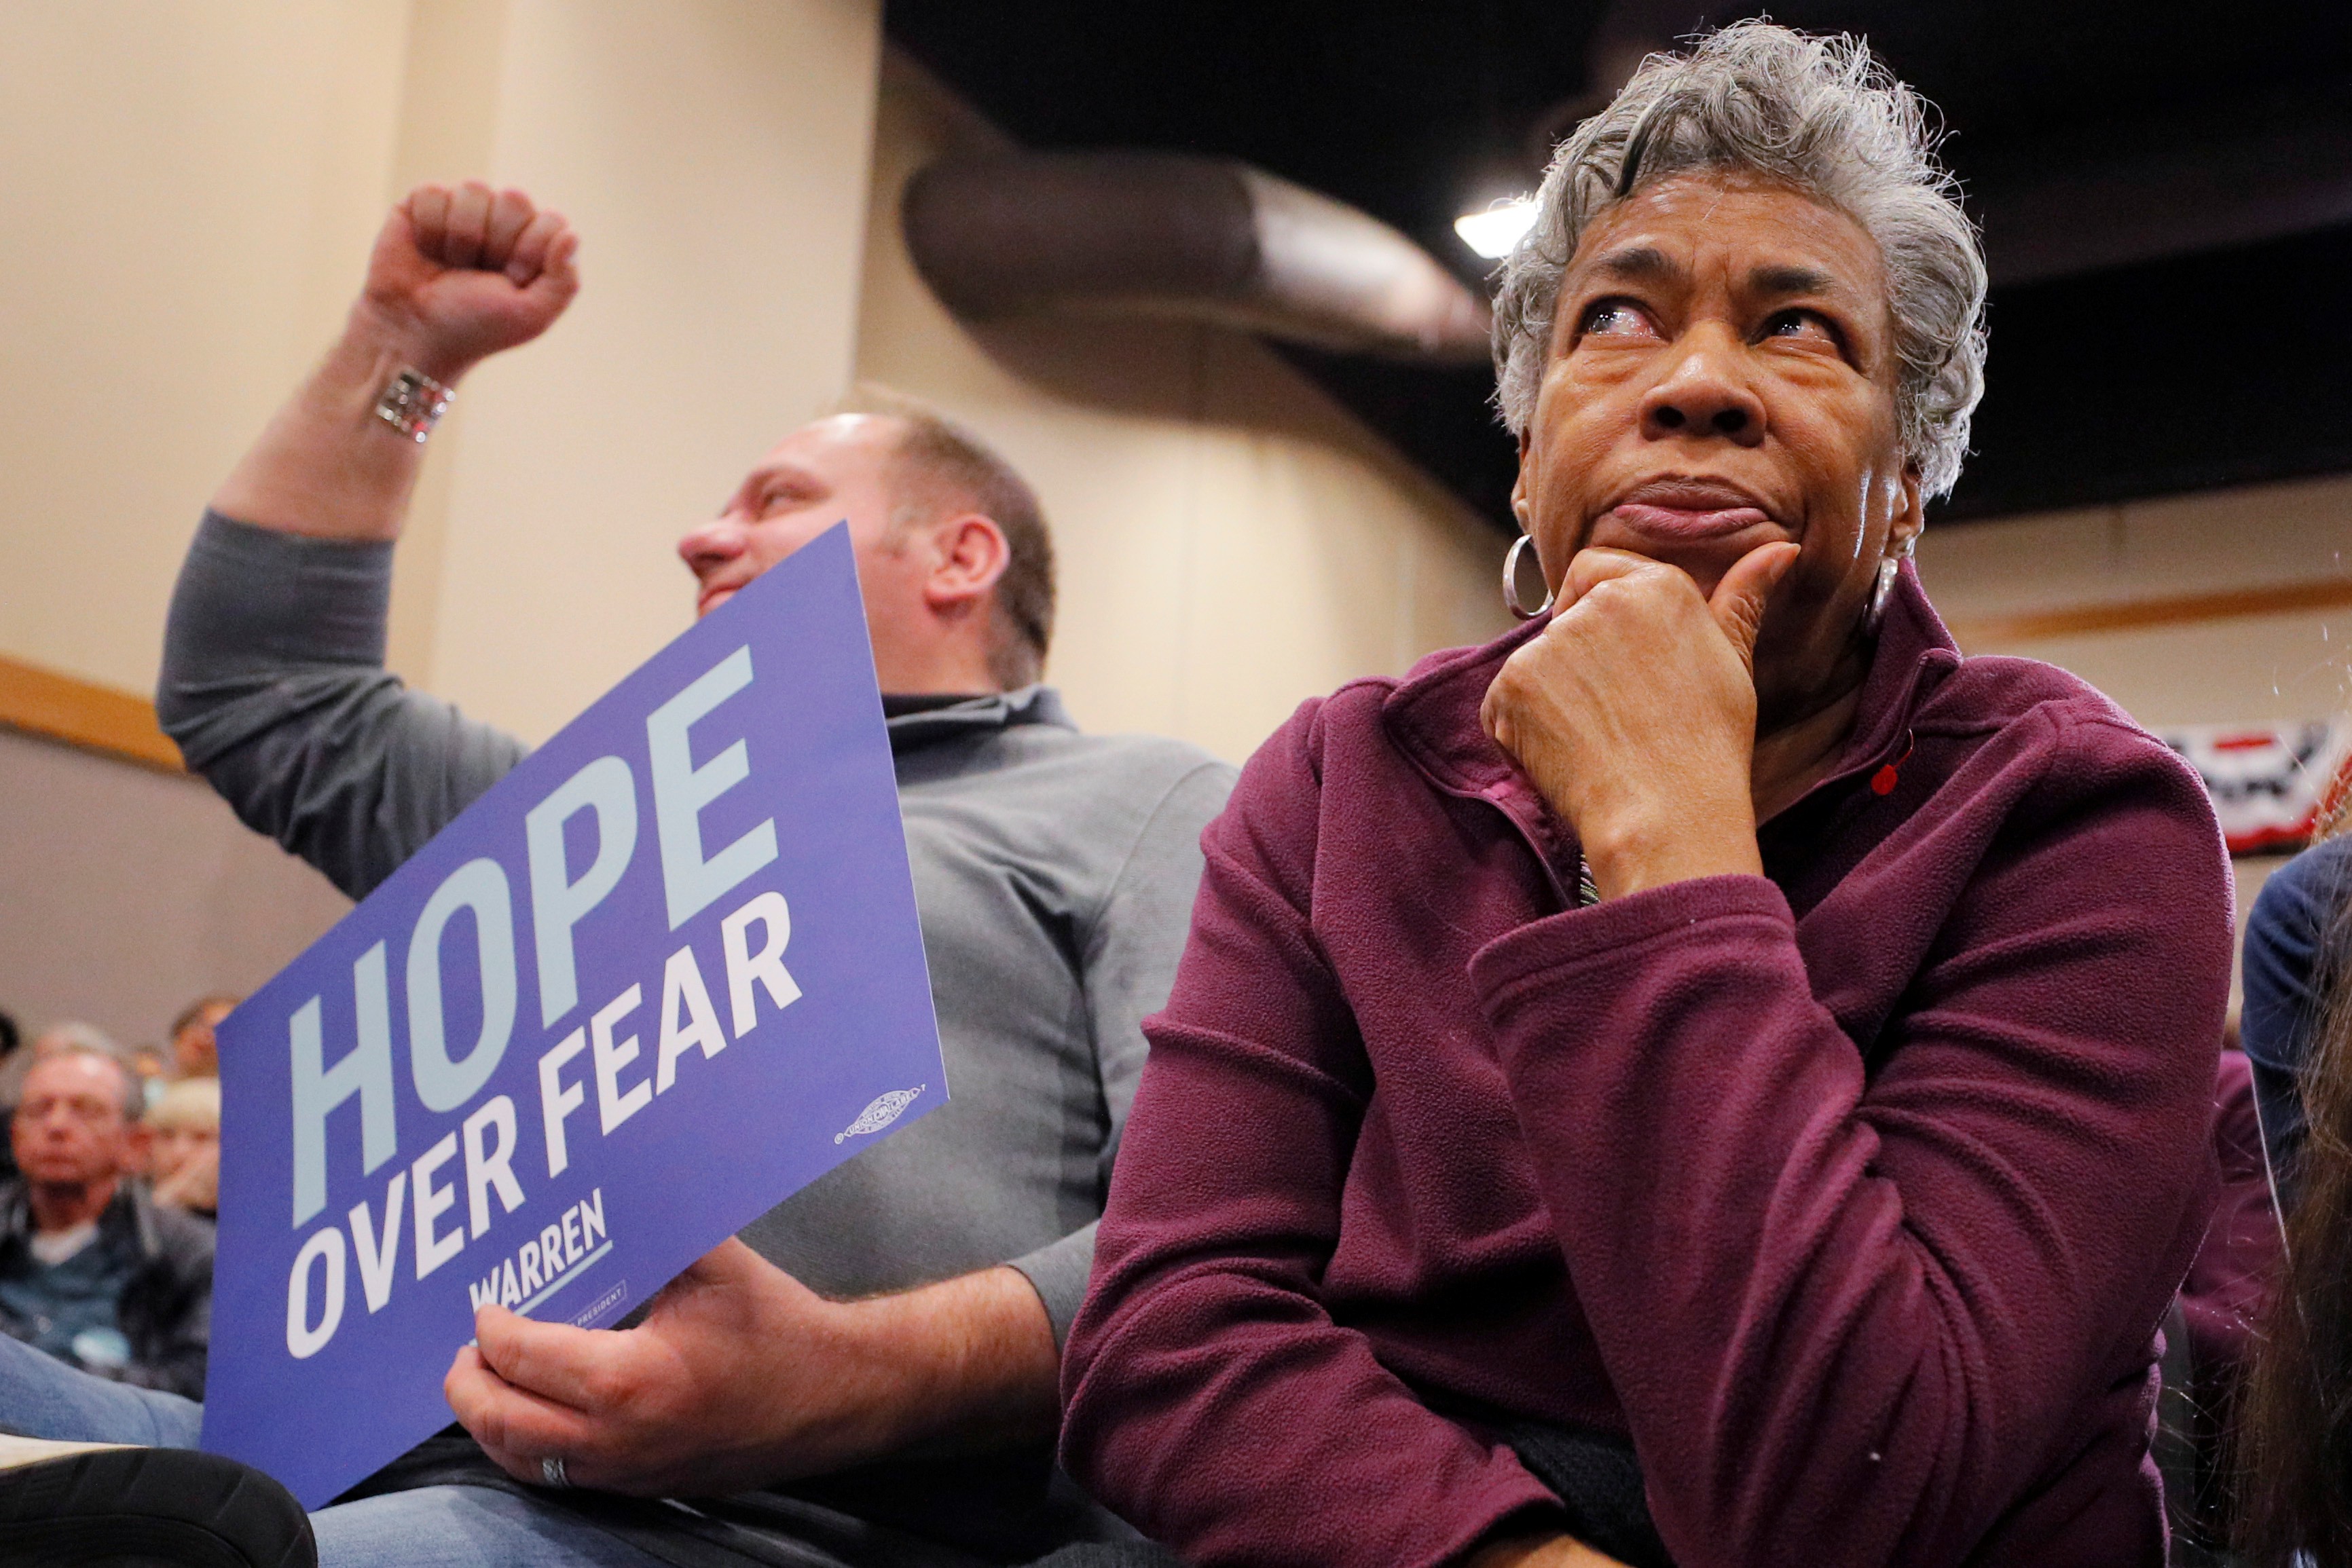 Audience members listen at a Democratic caucus rally in Iowa. Photo: Reuters